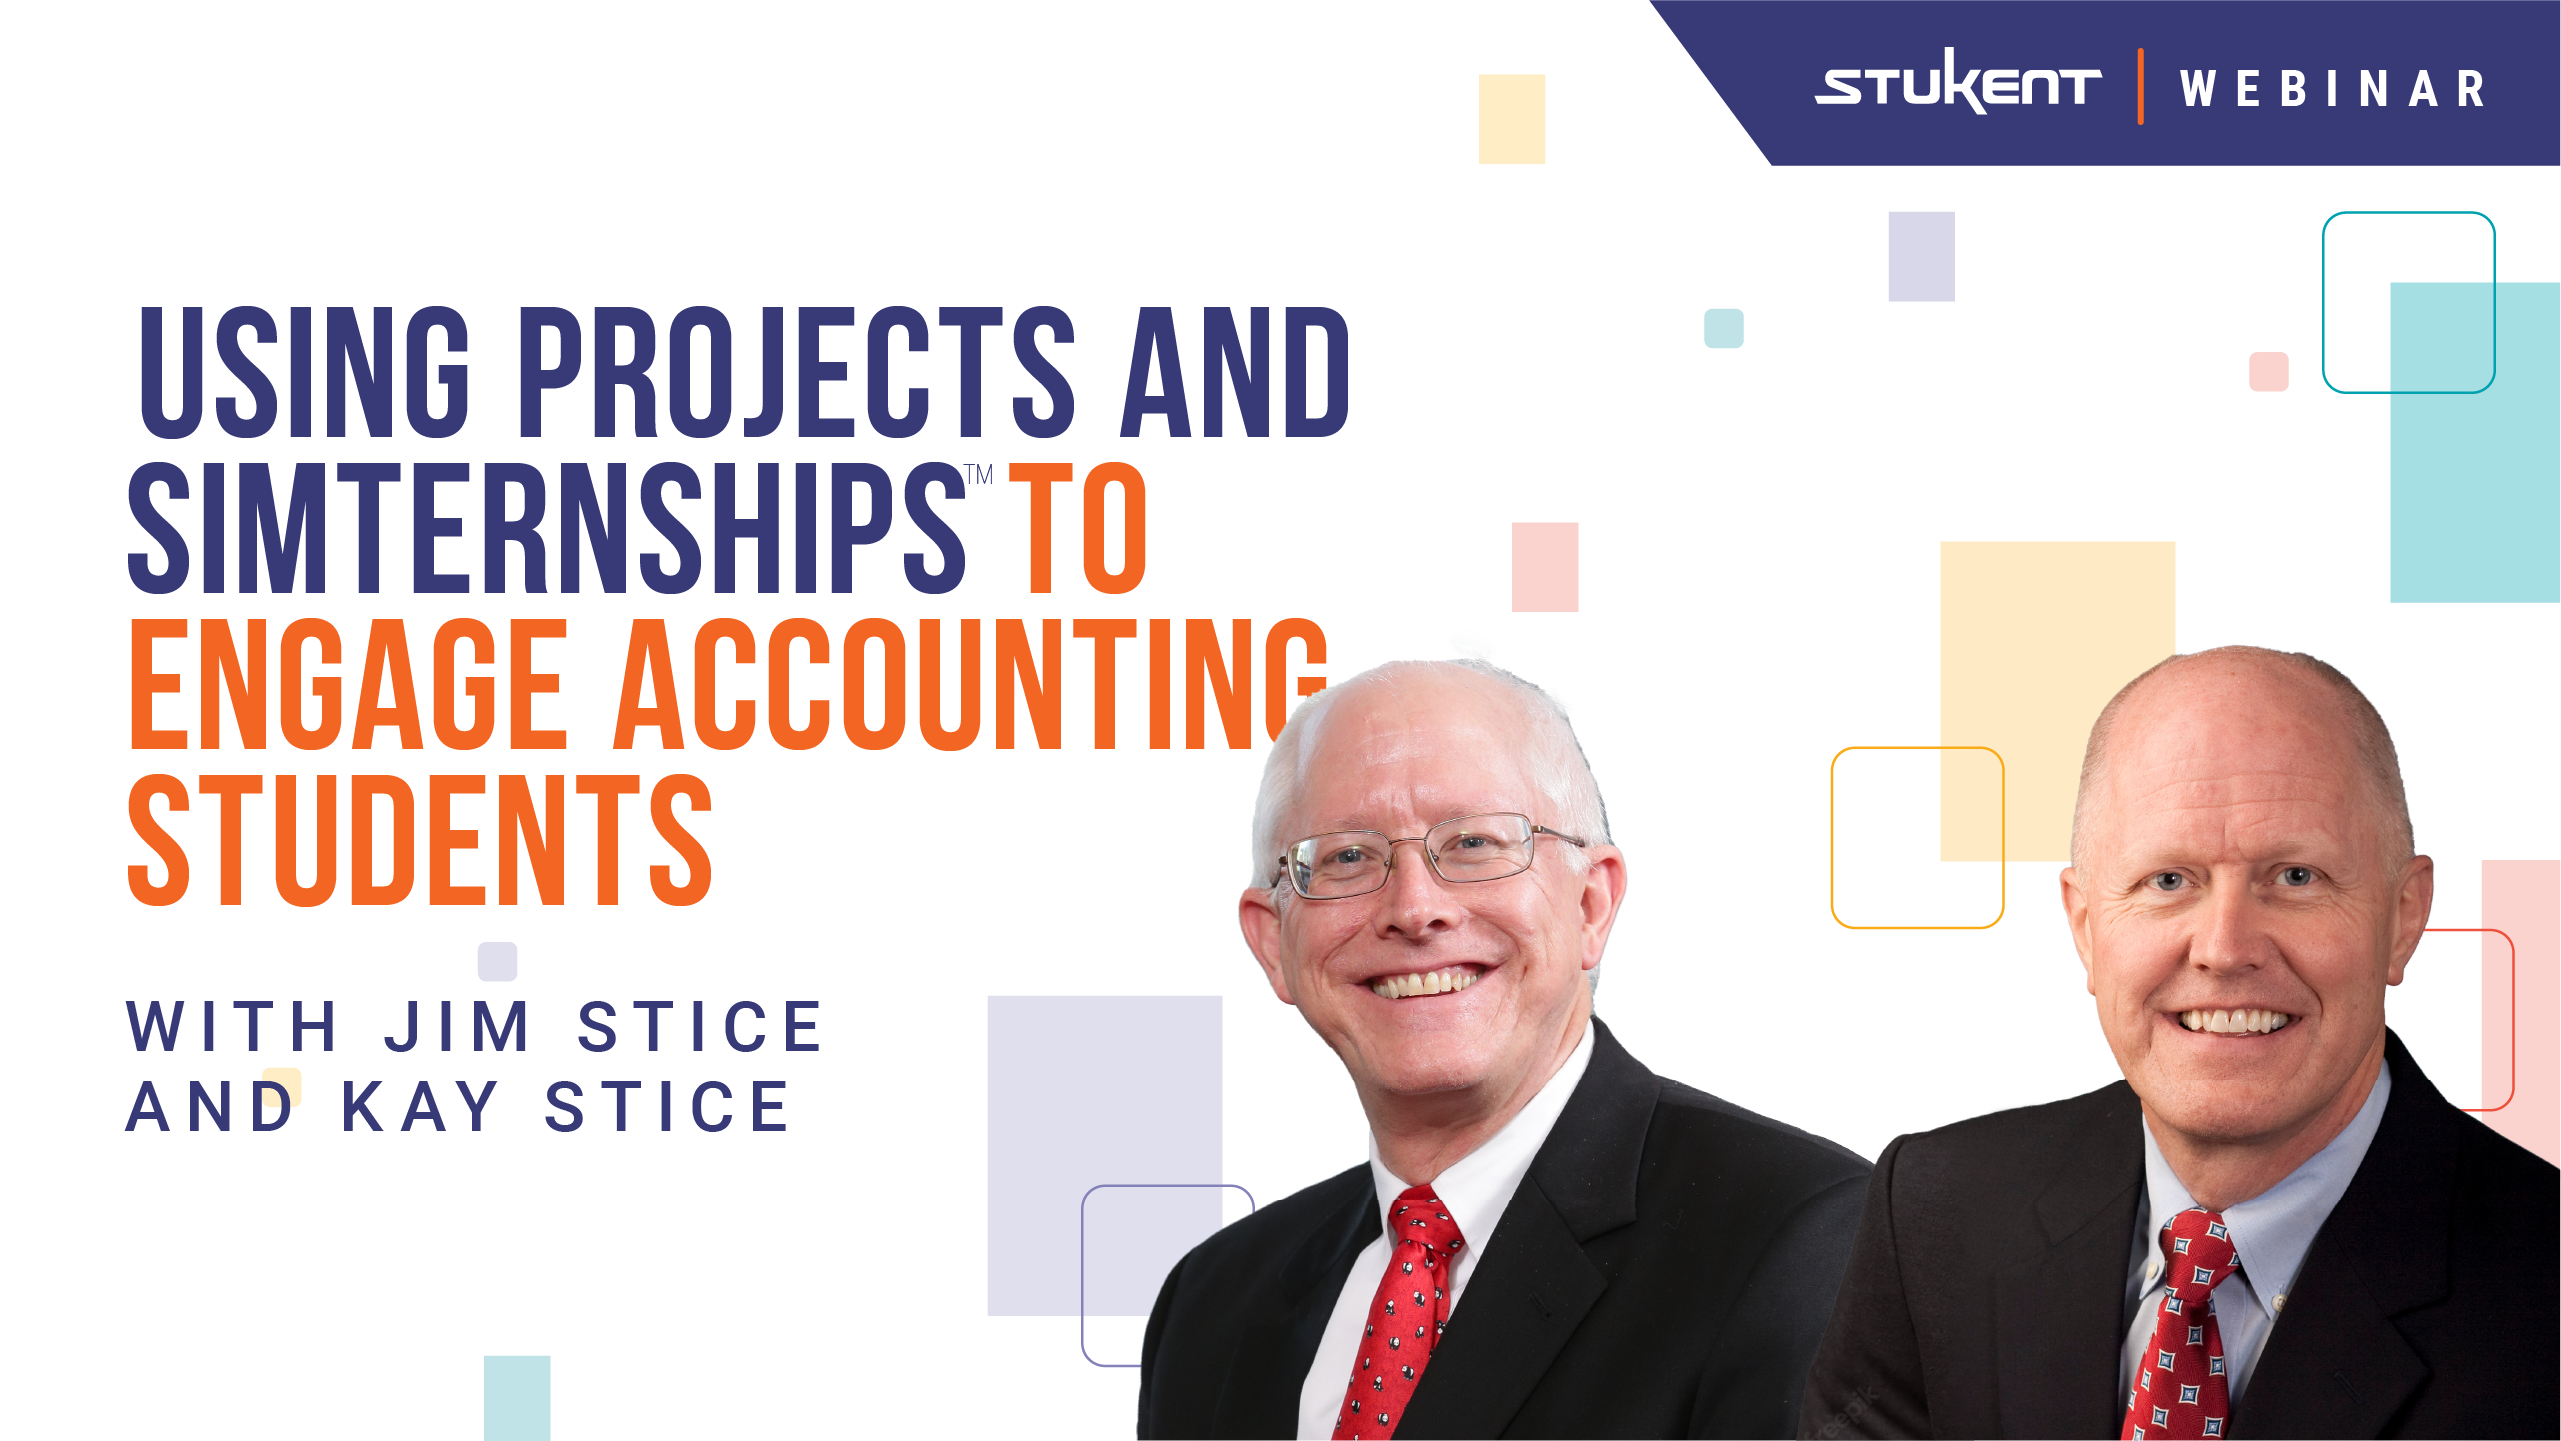 Using Projects and Simternships™ to Engage Accounting Students